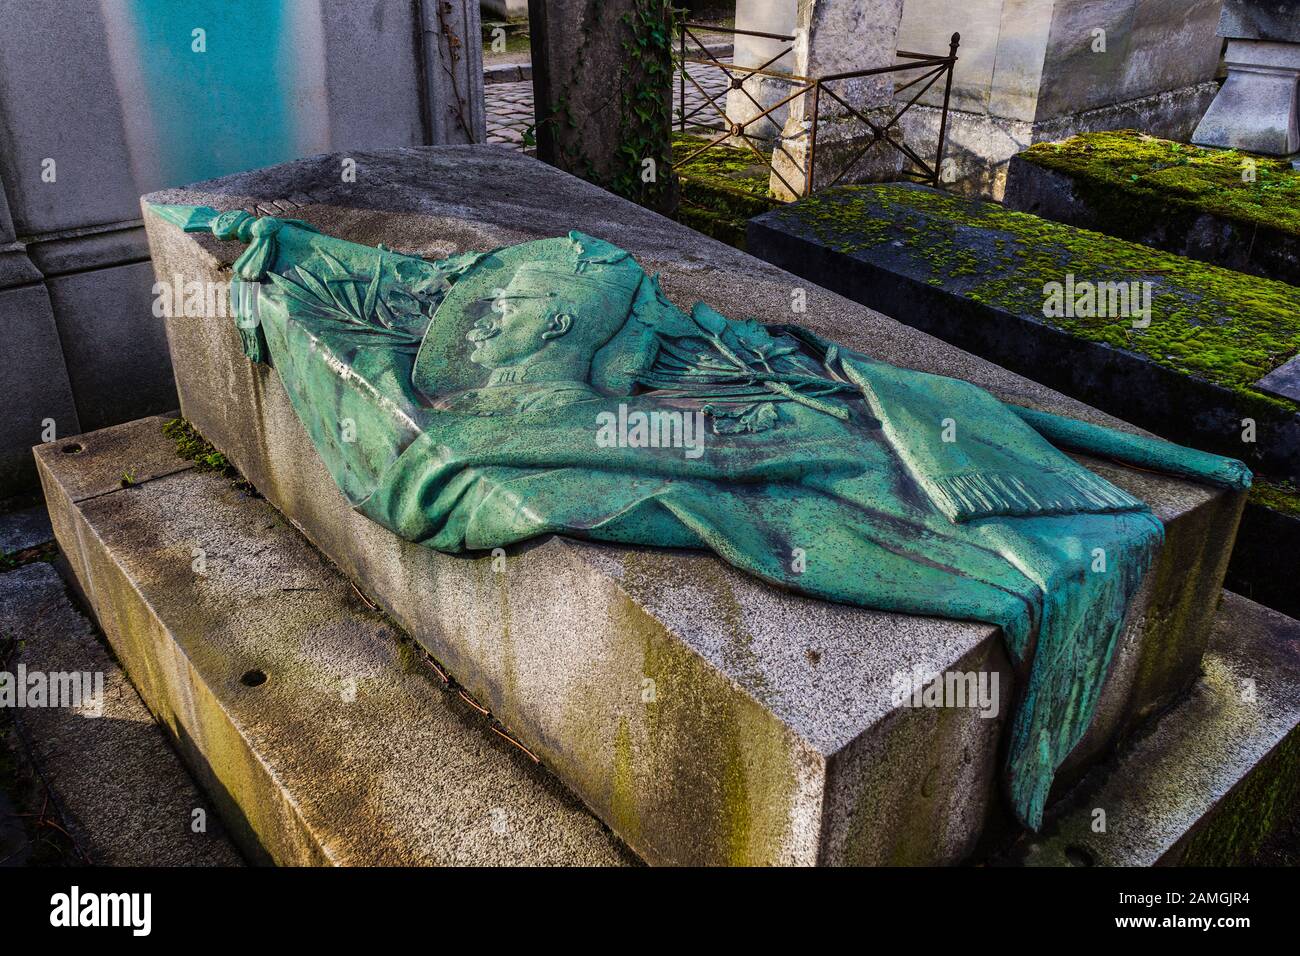 Ornate memorial tomb for a fallen army officer in the Père Lachaise Cemetery, Paris 75020, France. Stock Photo